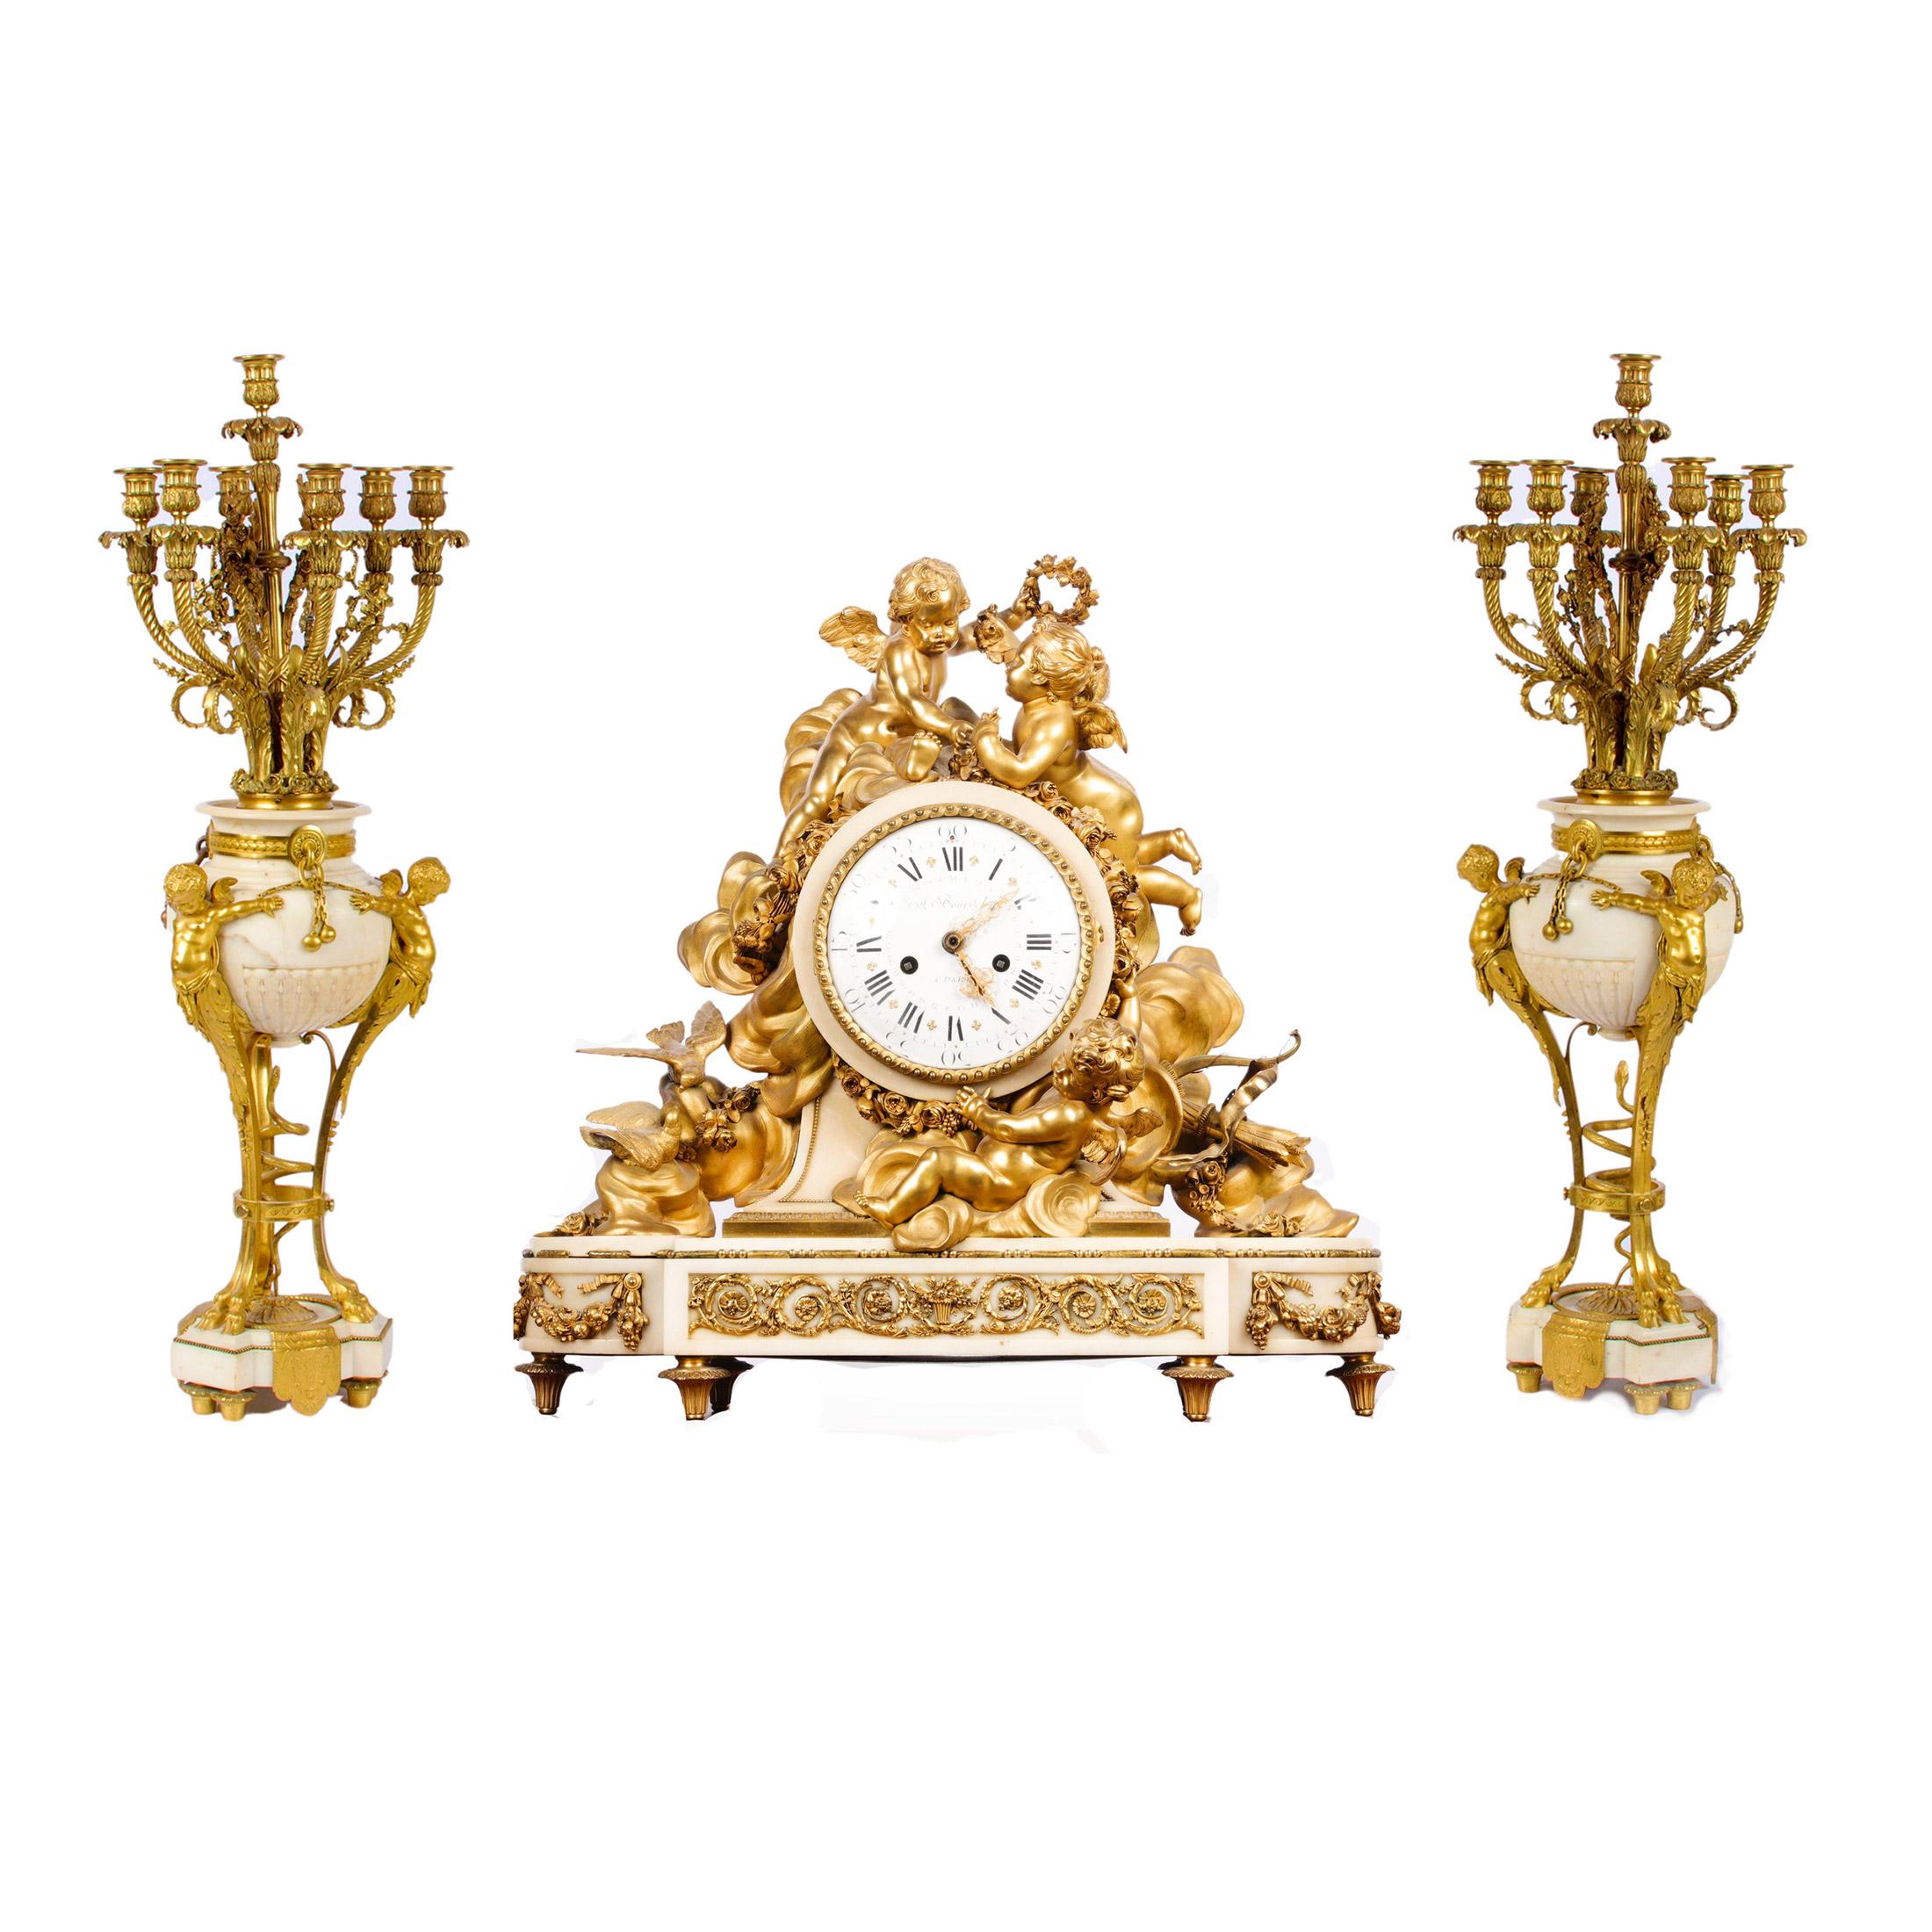 Highly Important Louis XVI style gilt bronze clockset by Beurdeley

A fine Louis XVI-style large gilt-bronze and white Rococo marble figural mantel clock is surmounted by three dore bronze putti figures hanging floral swag adornments among clouds